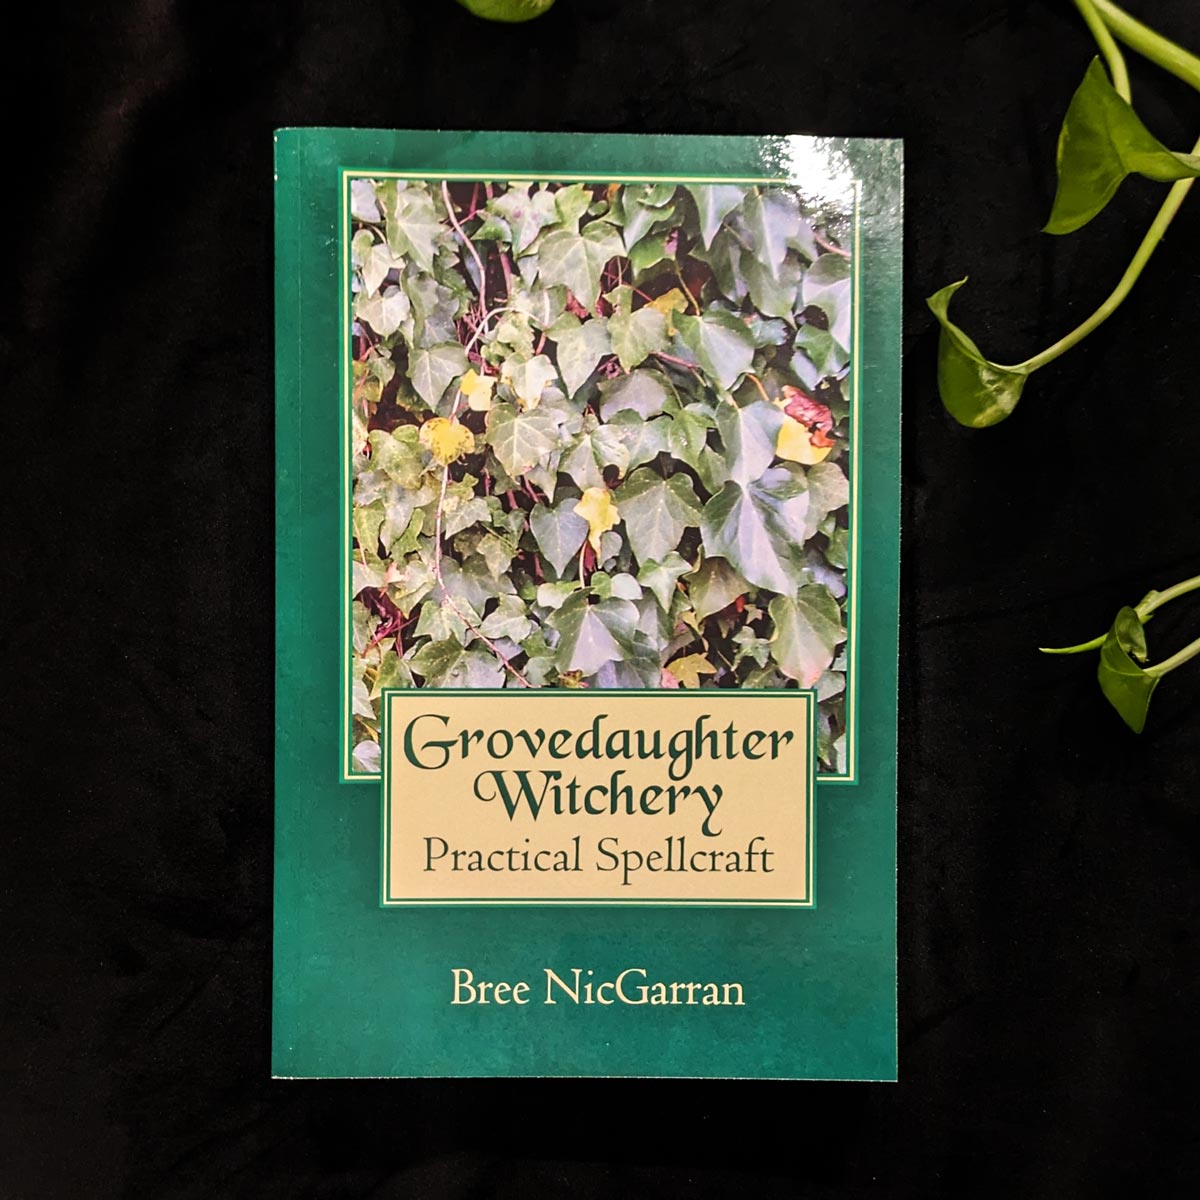 Grovedaughter Witchery by Bree NicGarran